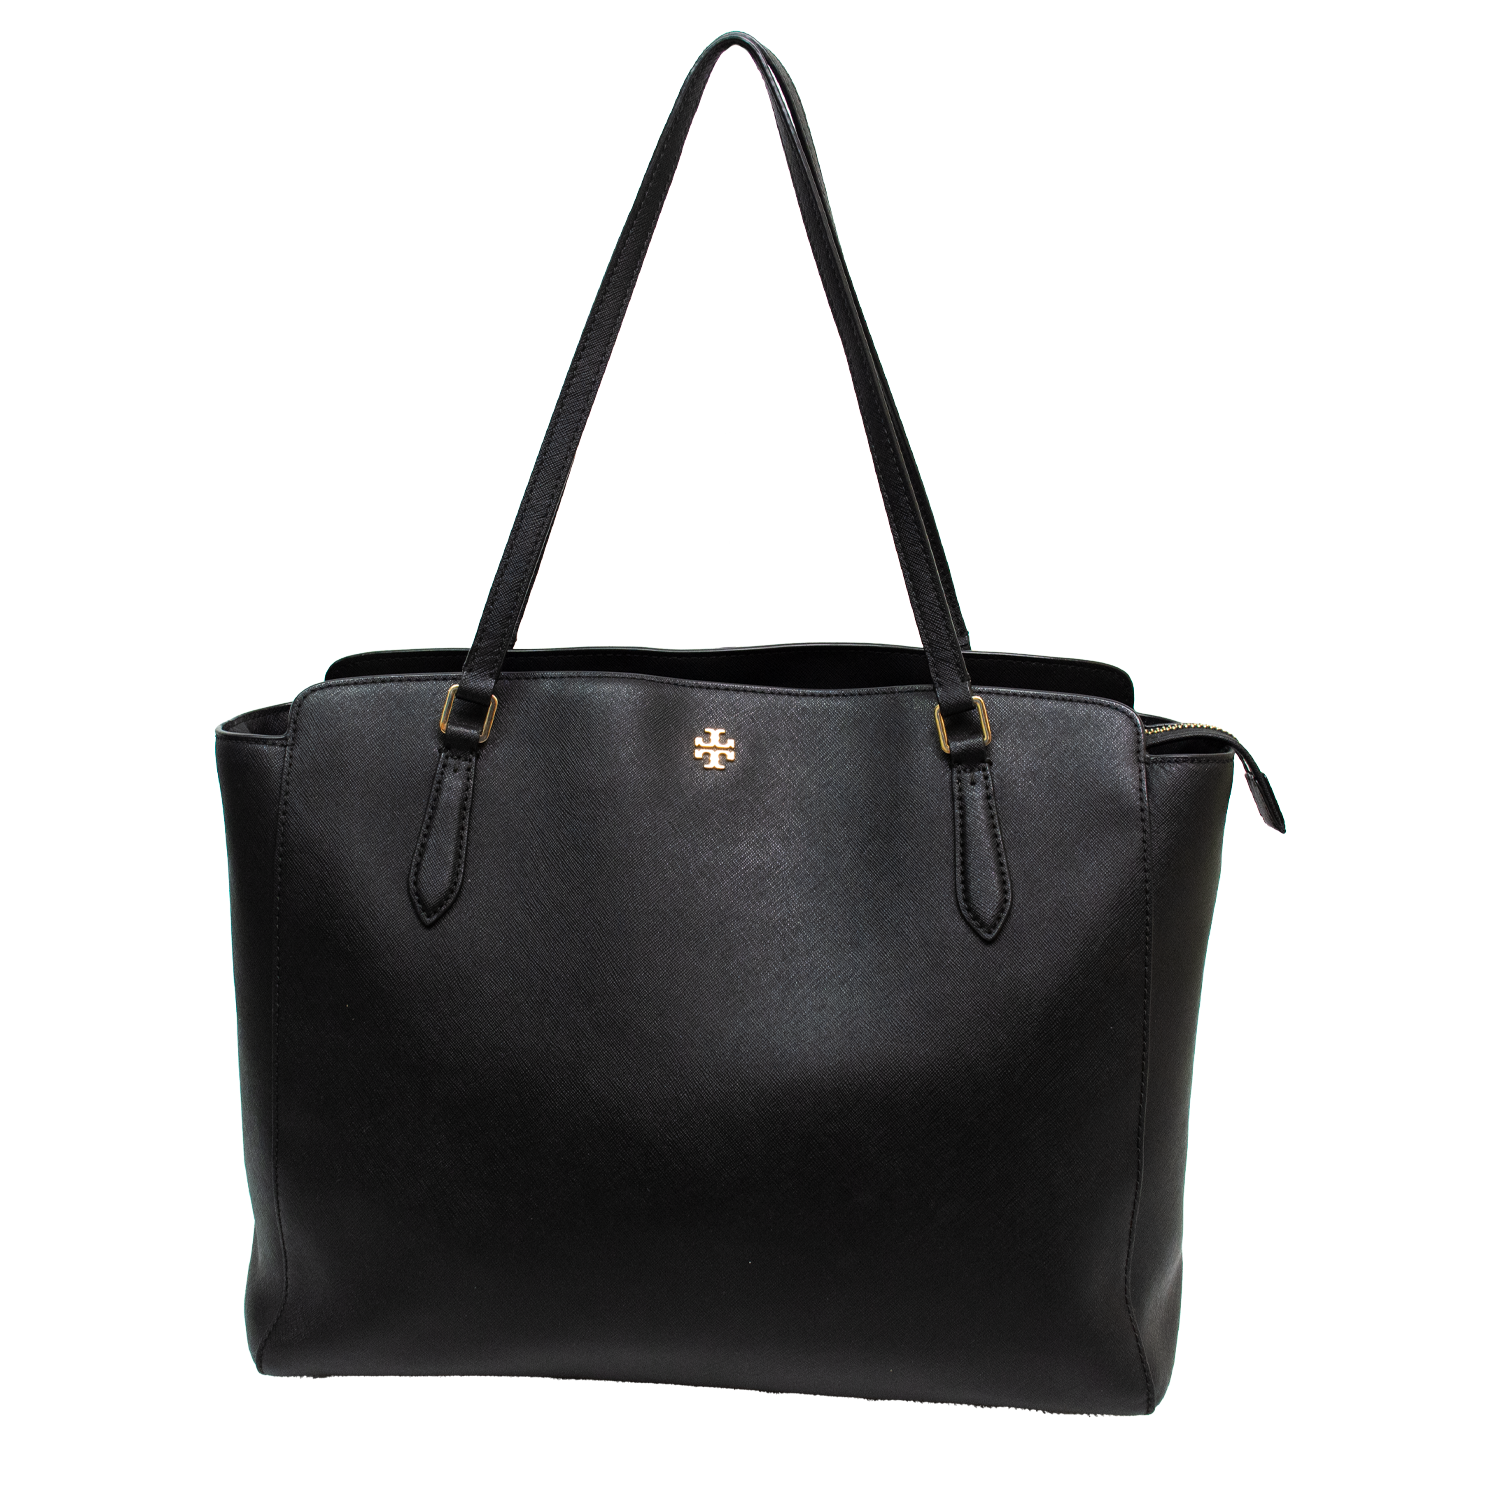 Tory Burch Womens Tote Shoulder Bag - Saffiano Black Leather